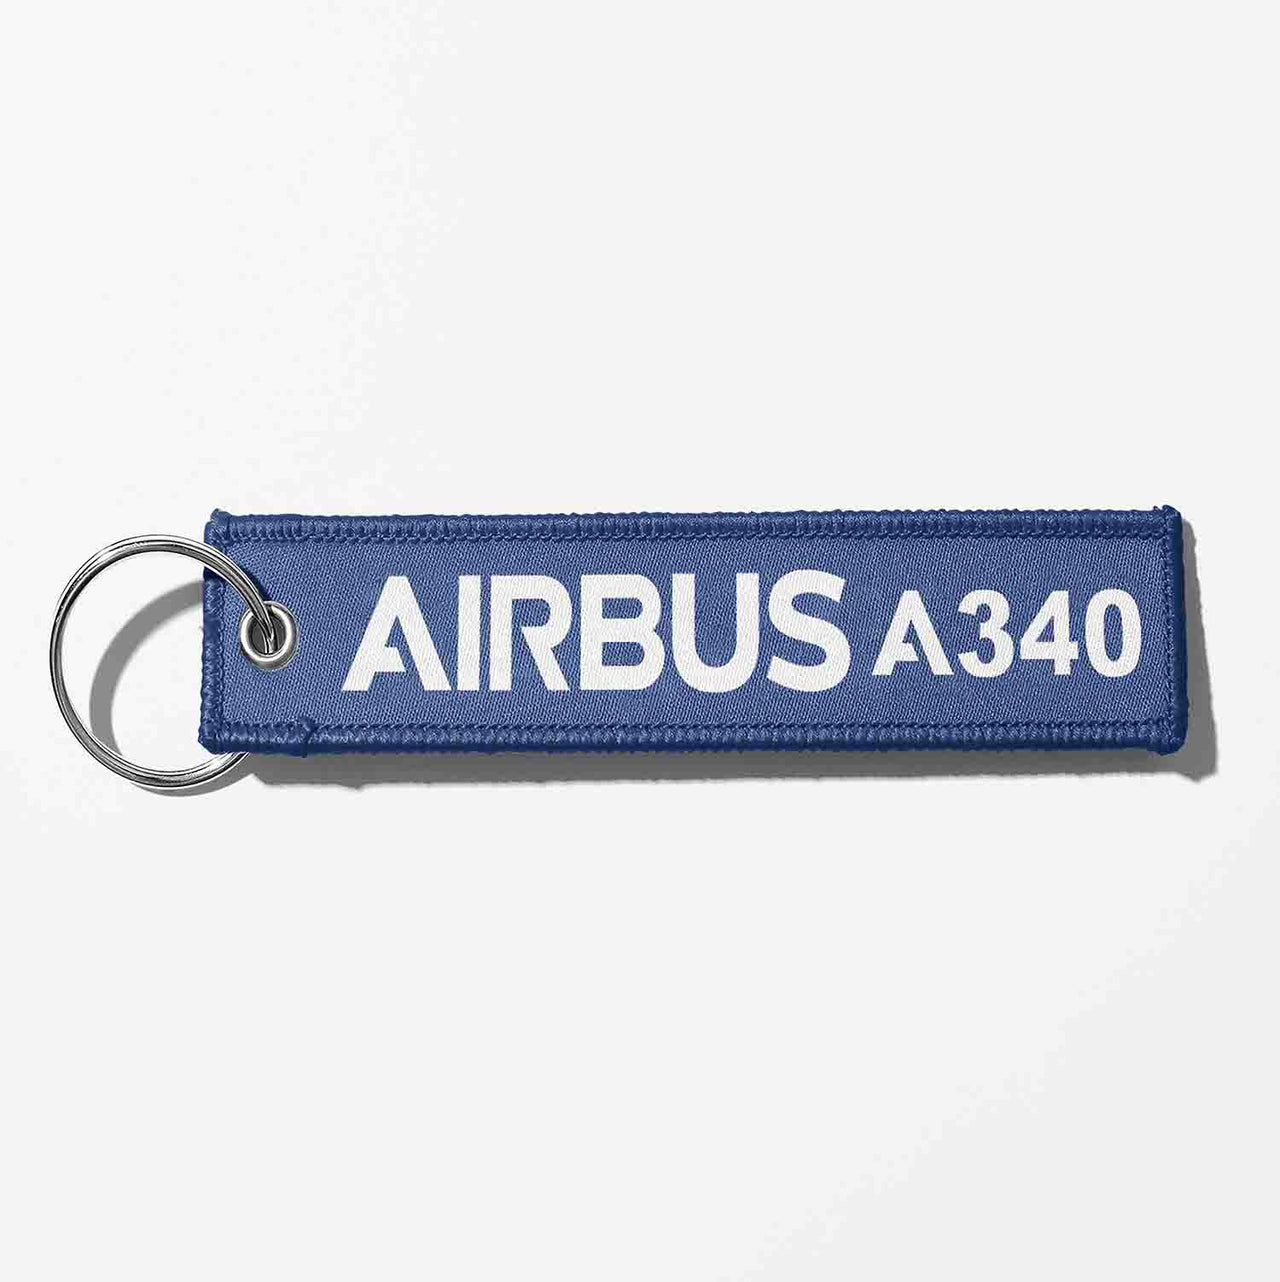 Airbus A340 & Text Designed Key Chains